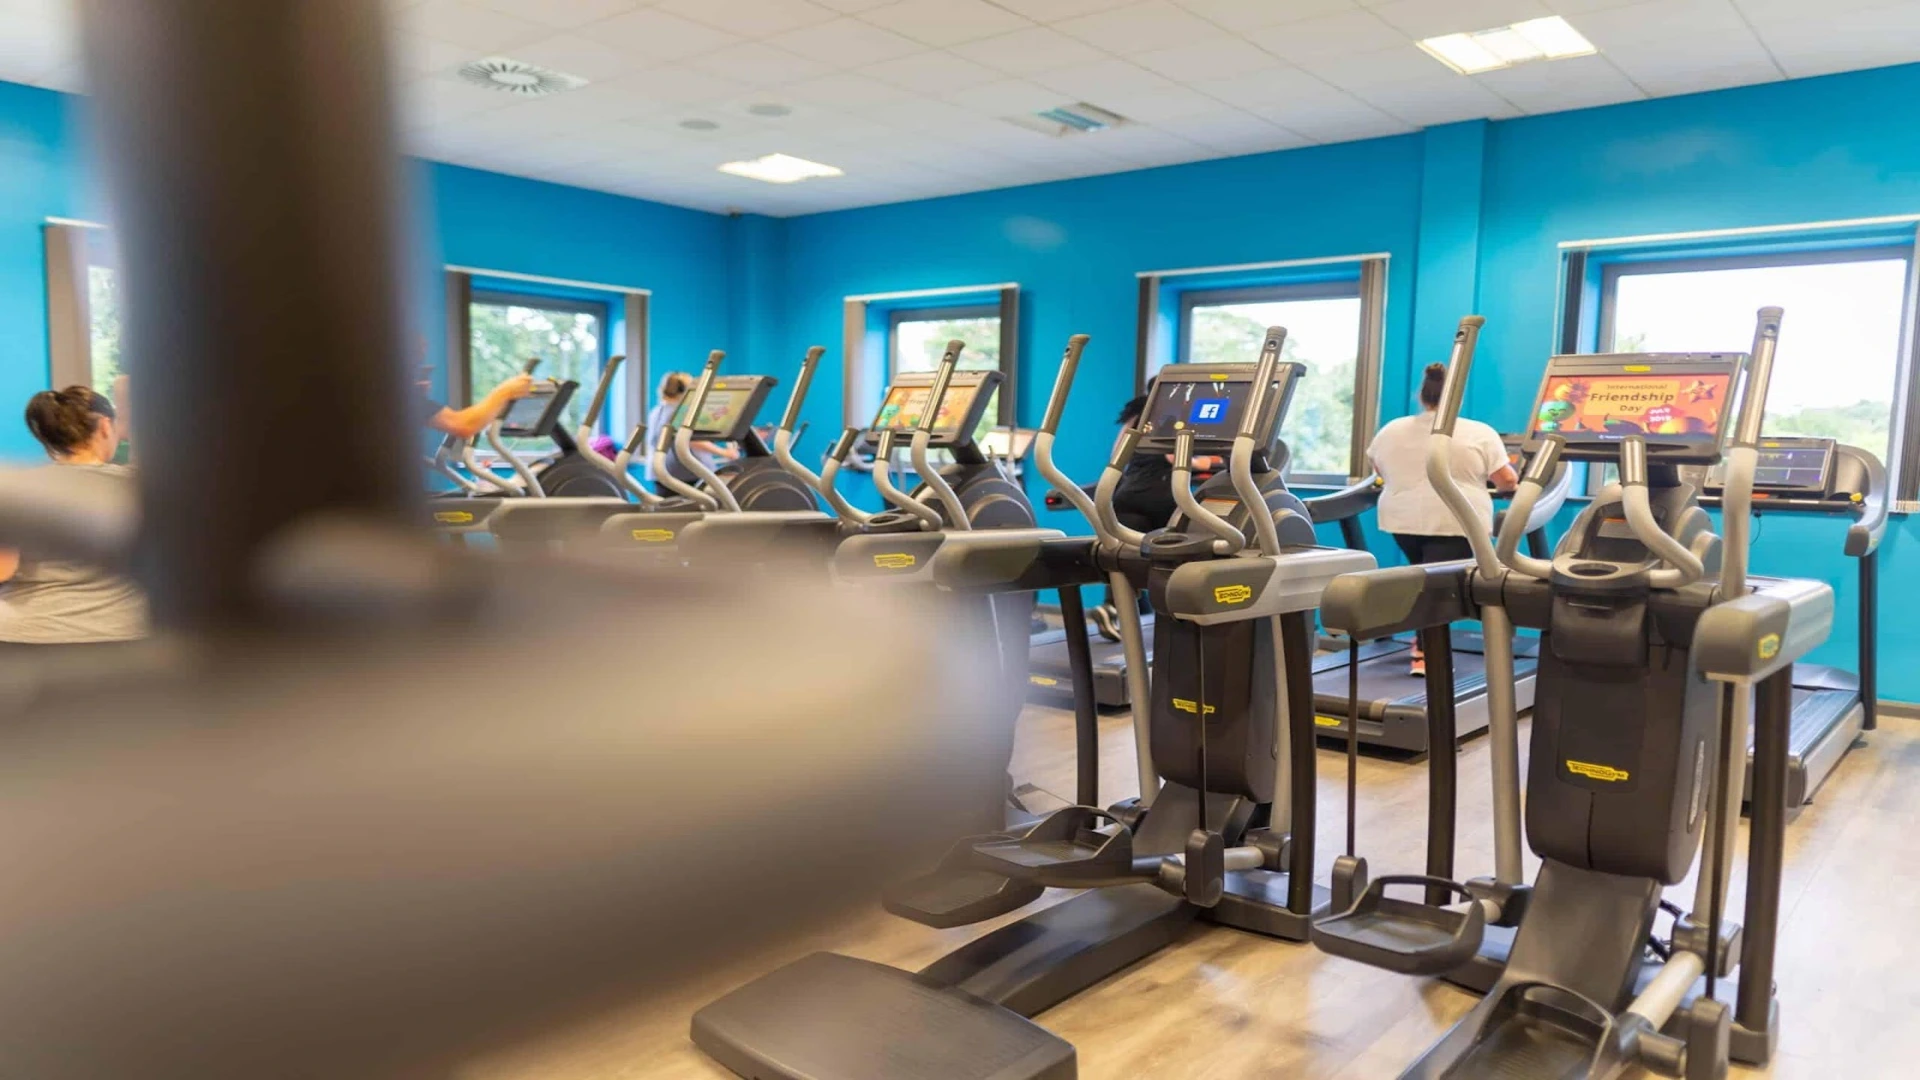 How to Design a Gym Fitness Area Covered